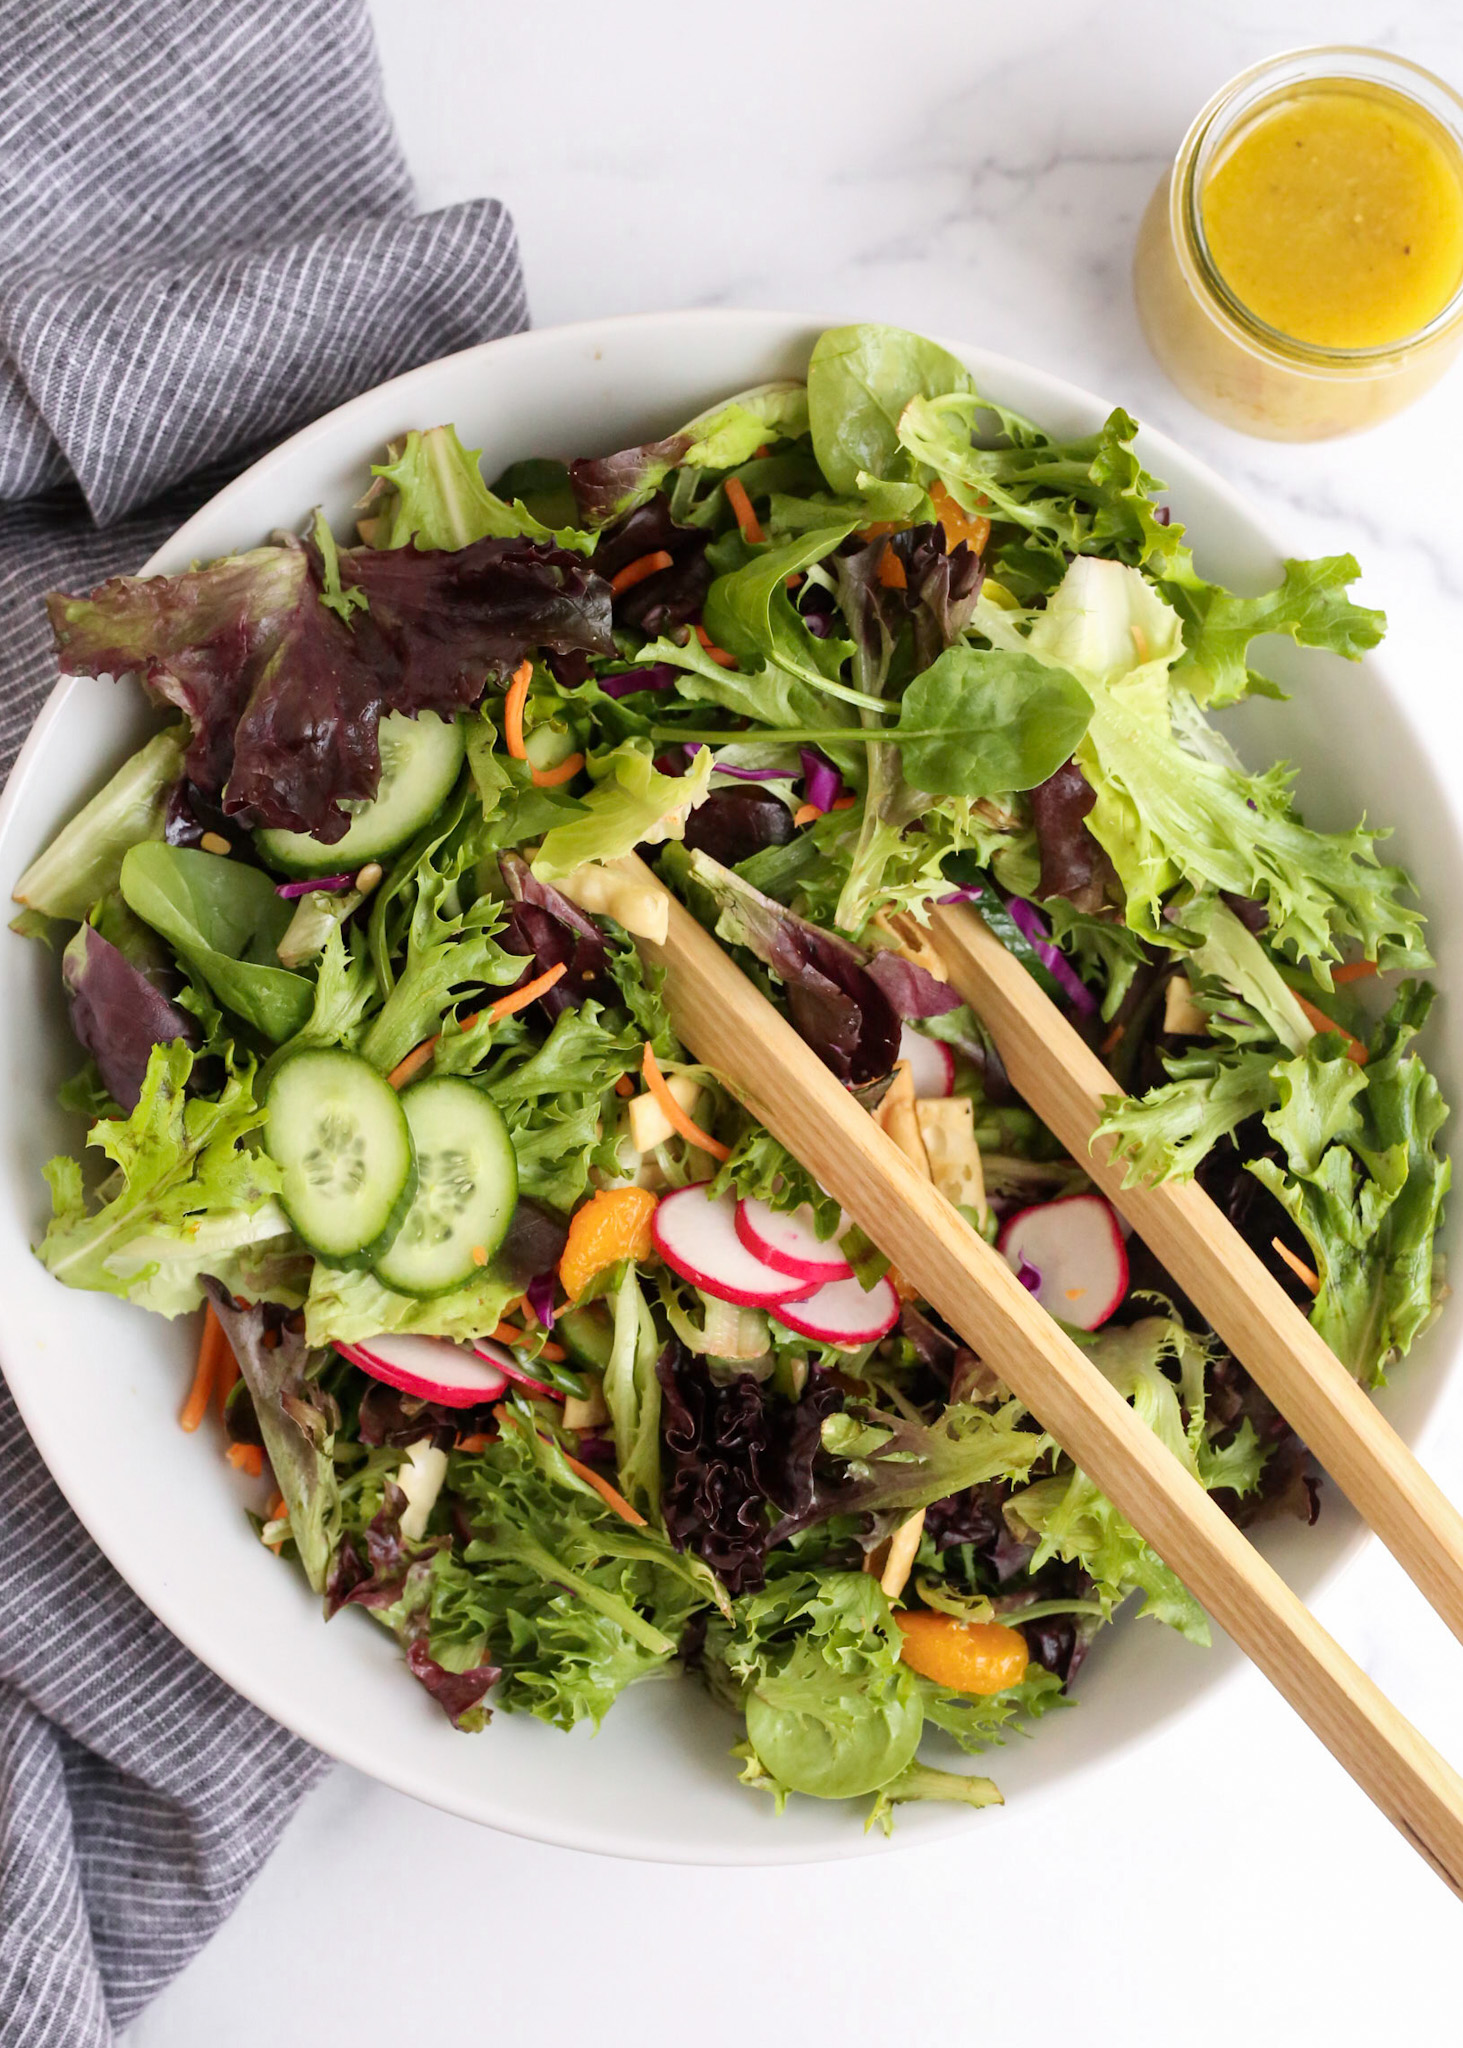 Overhead view of a fresh mixed greens salad in a large white serving bowl with wooden salad tongs positioned on the side of the bowl, and a small glass jar with an easy homemade vinaigrette salad dressing off to the right side